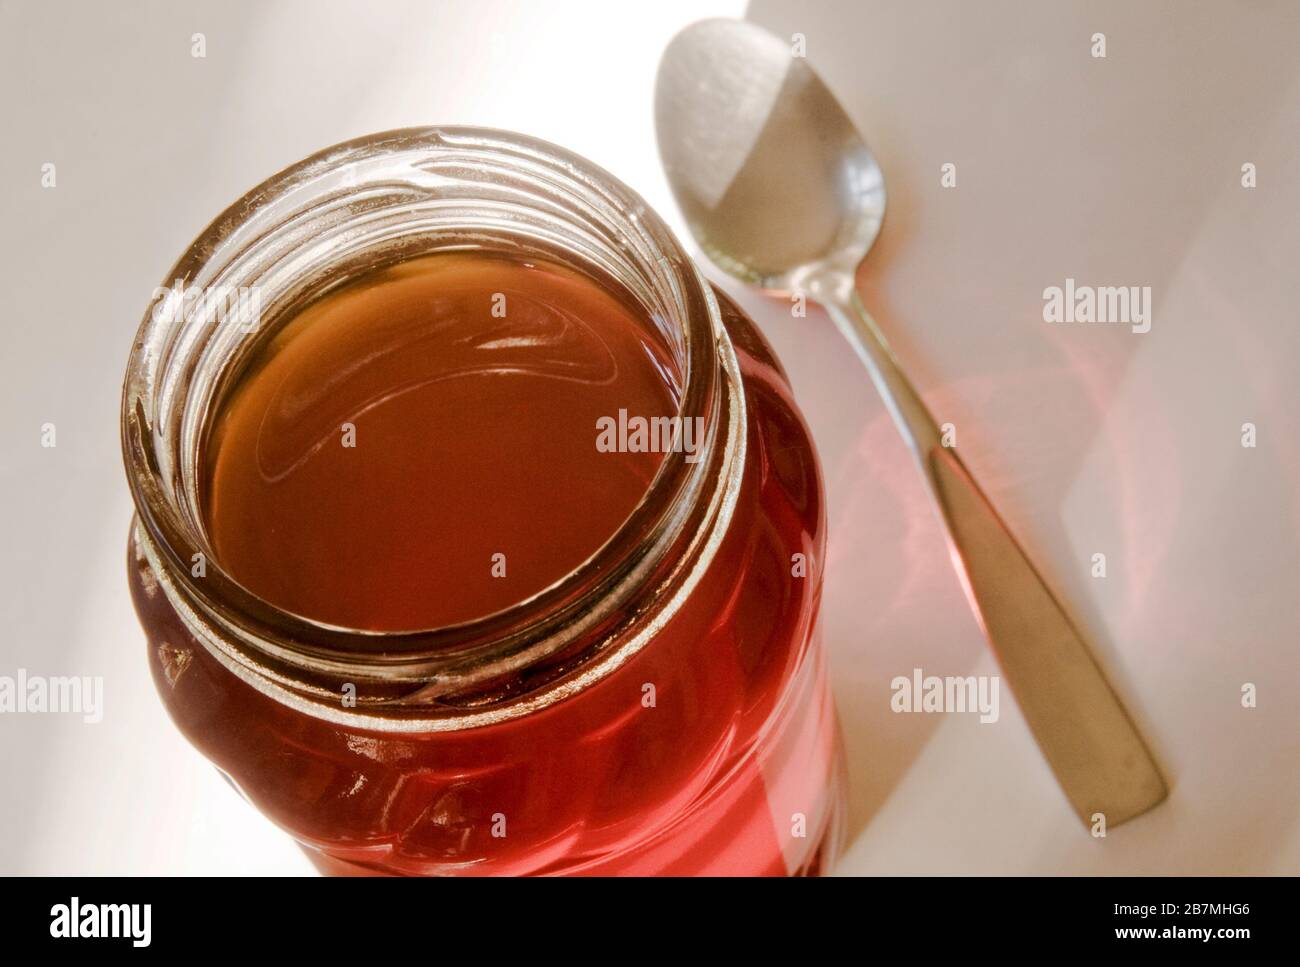 Honey is a sweet, viscous food made by honey bees. It is both healthy and delicious. Stock Photo